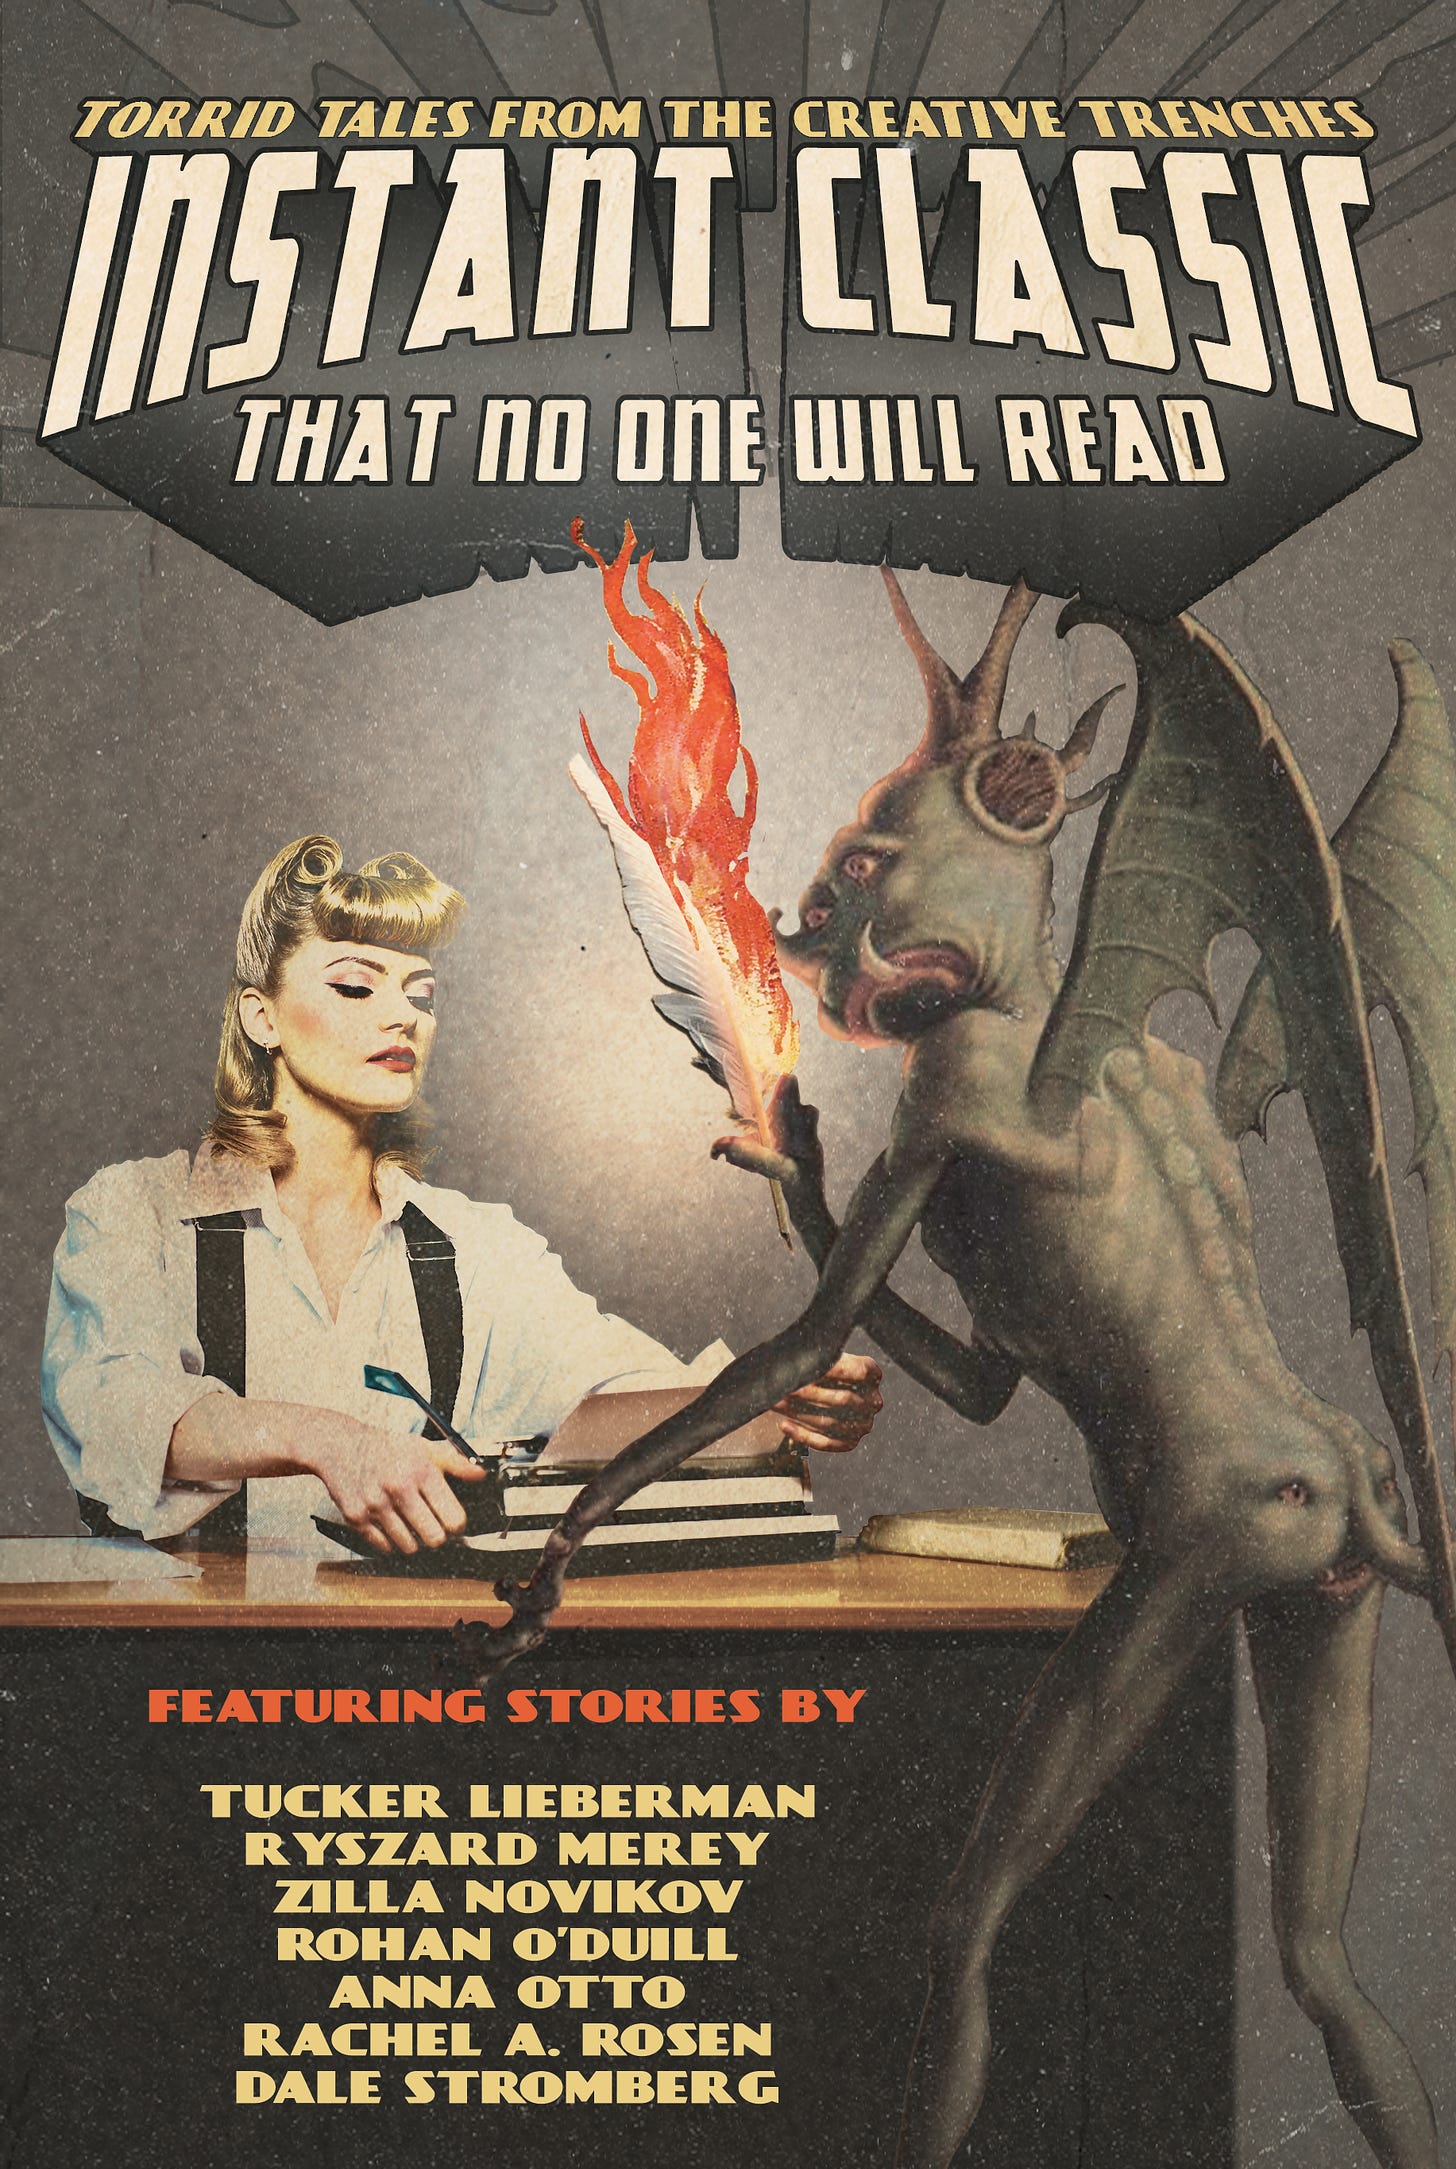 The Instant Classic (That No One Will Read) cover. You know. The one with a demon with a face on its butt.